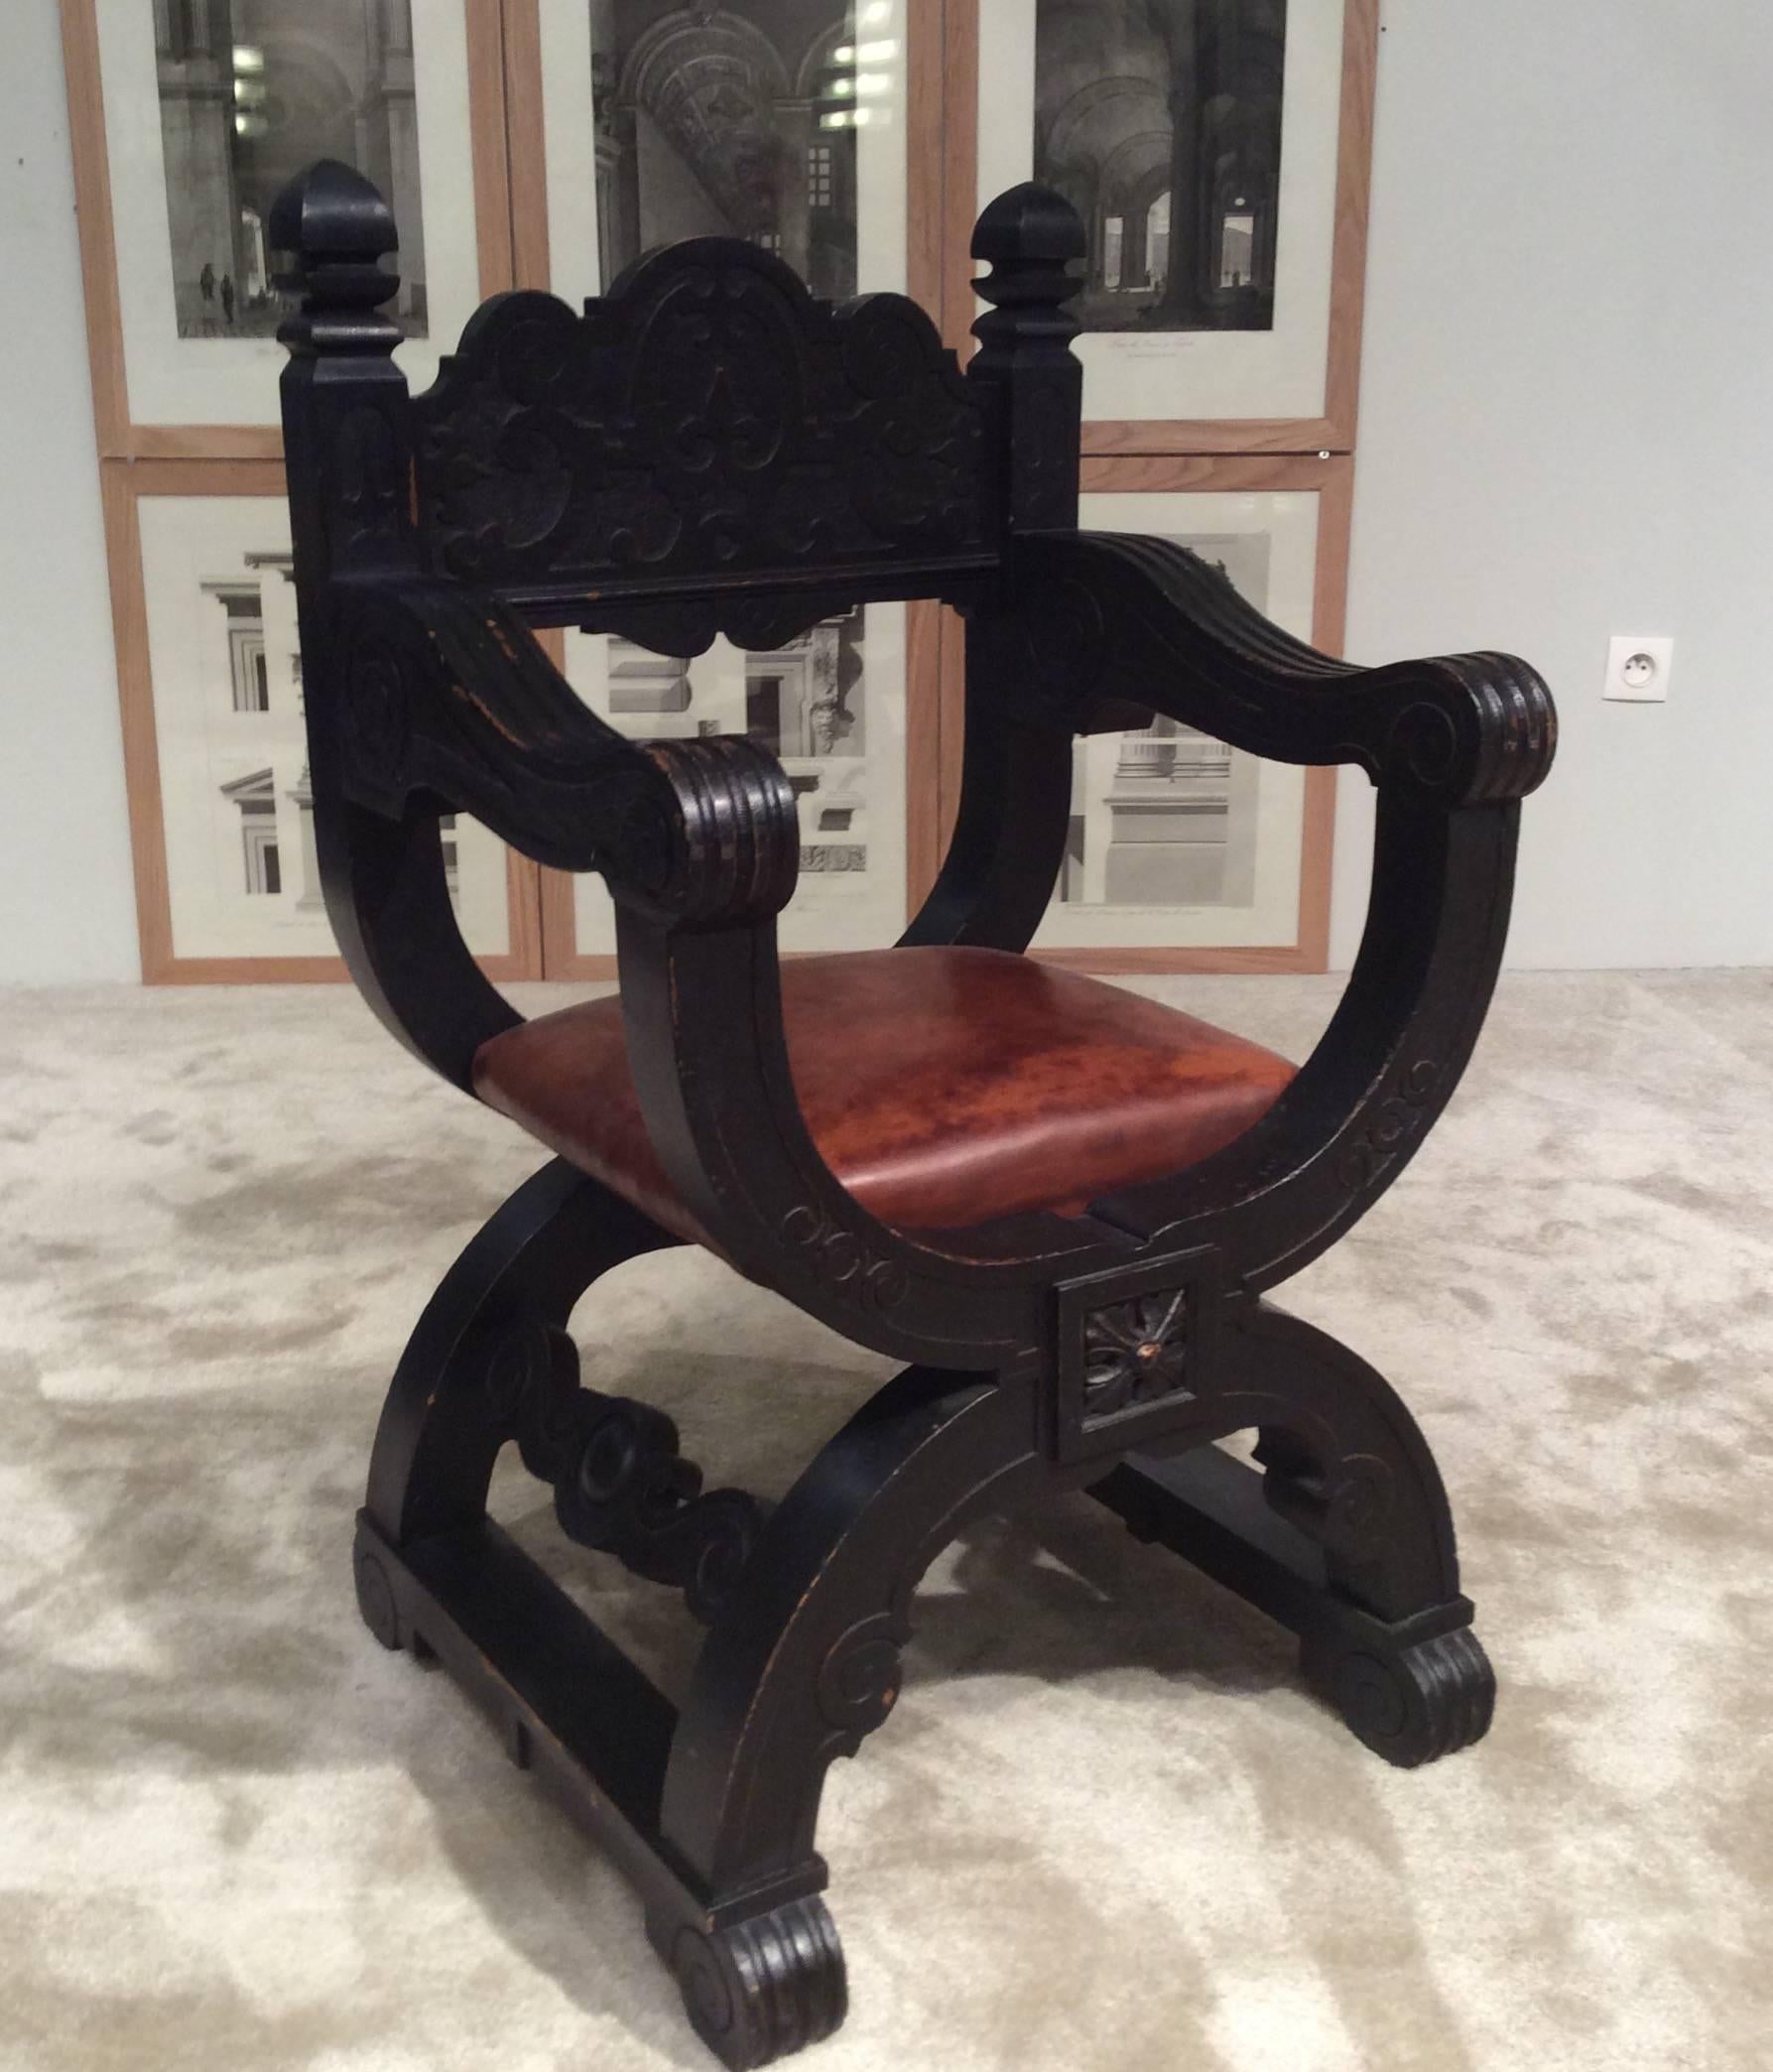 Late 19th-early 20th century, very elegant pair of Dagobert seats in oak.
Black patinated. Brown leather seat.